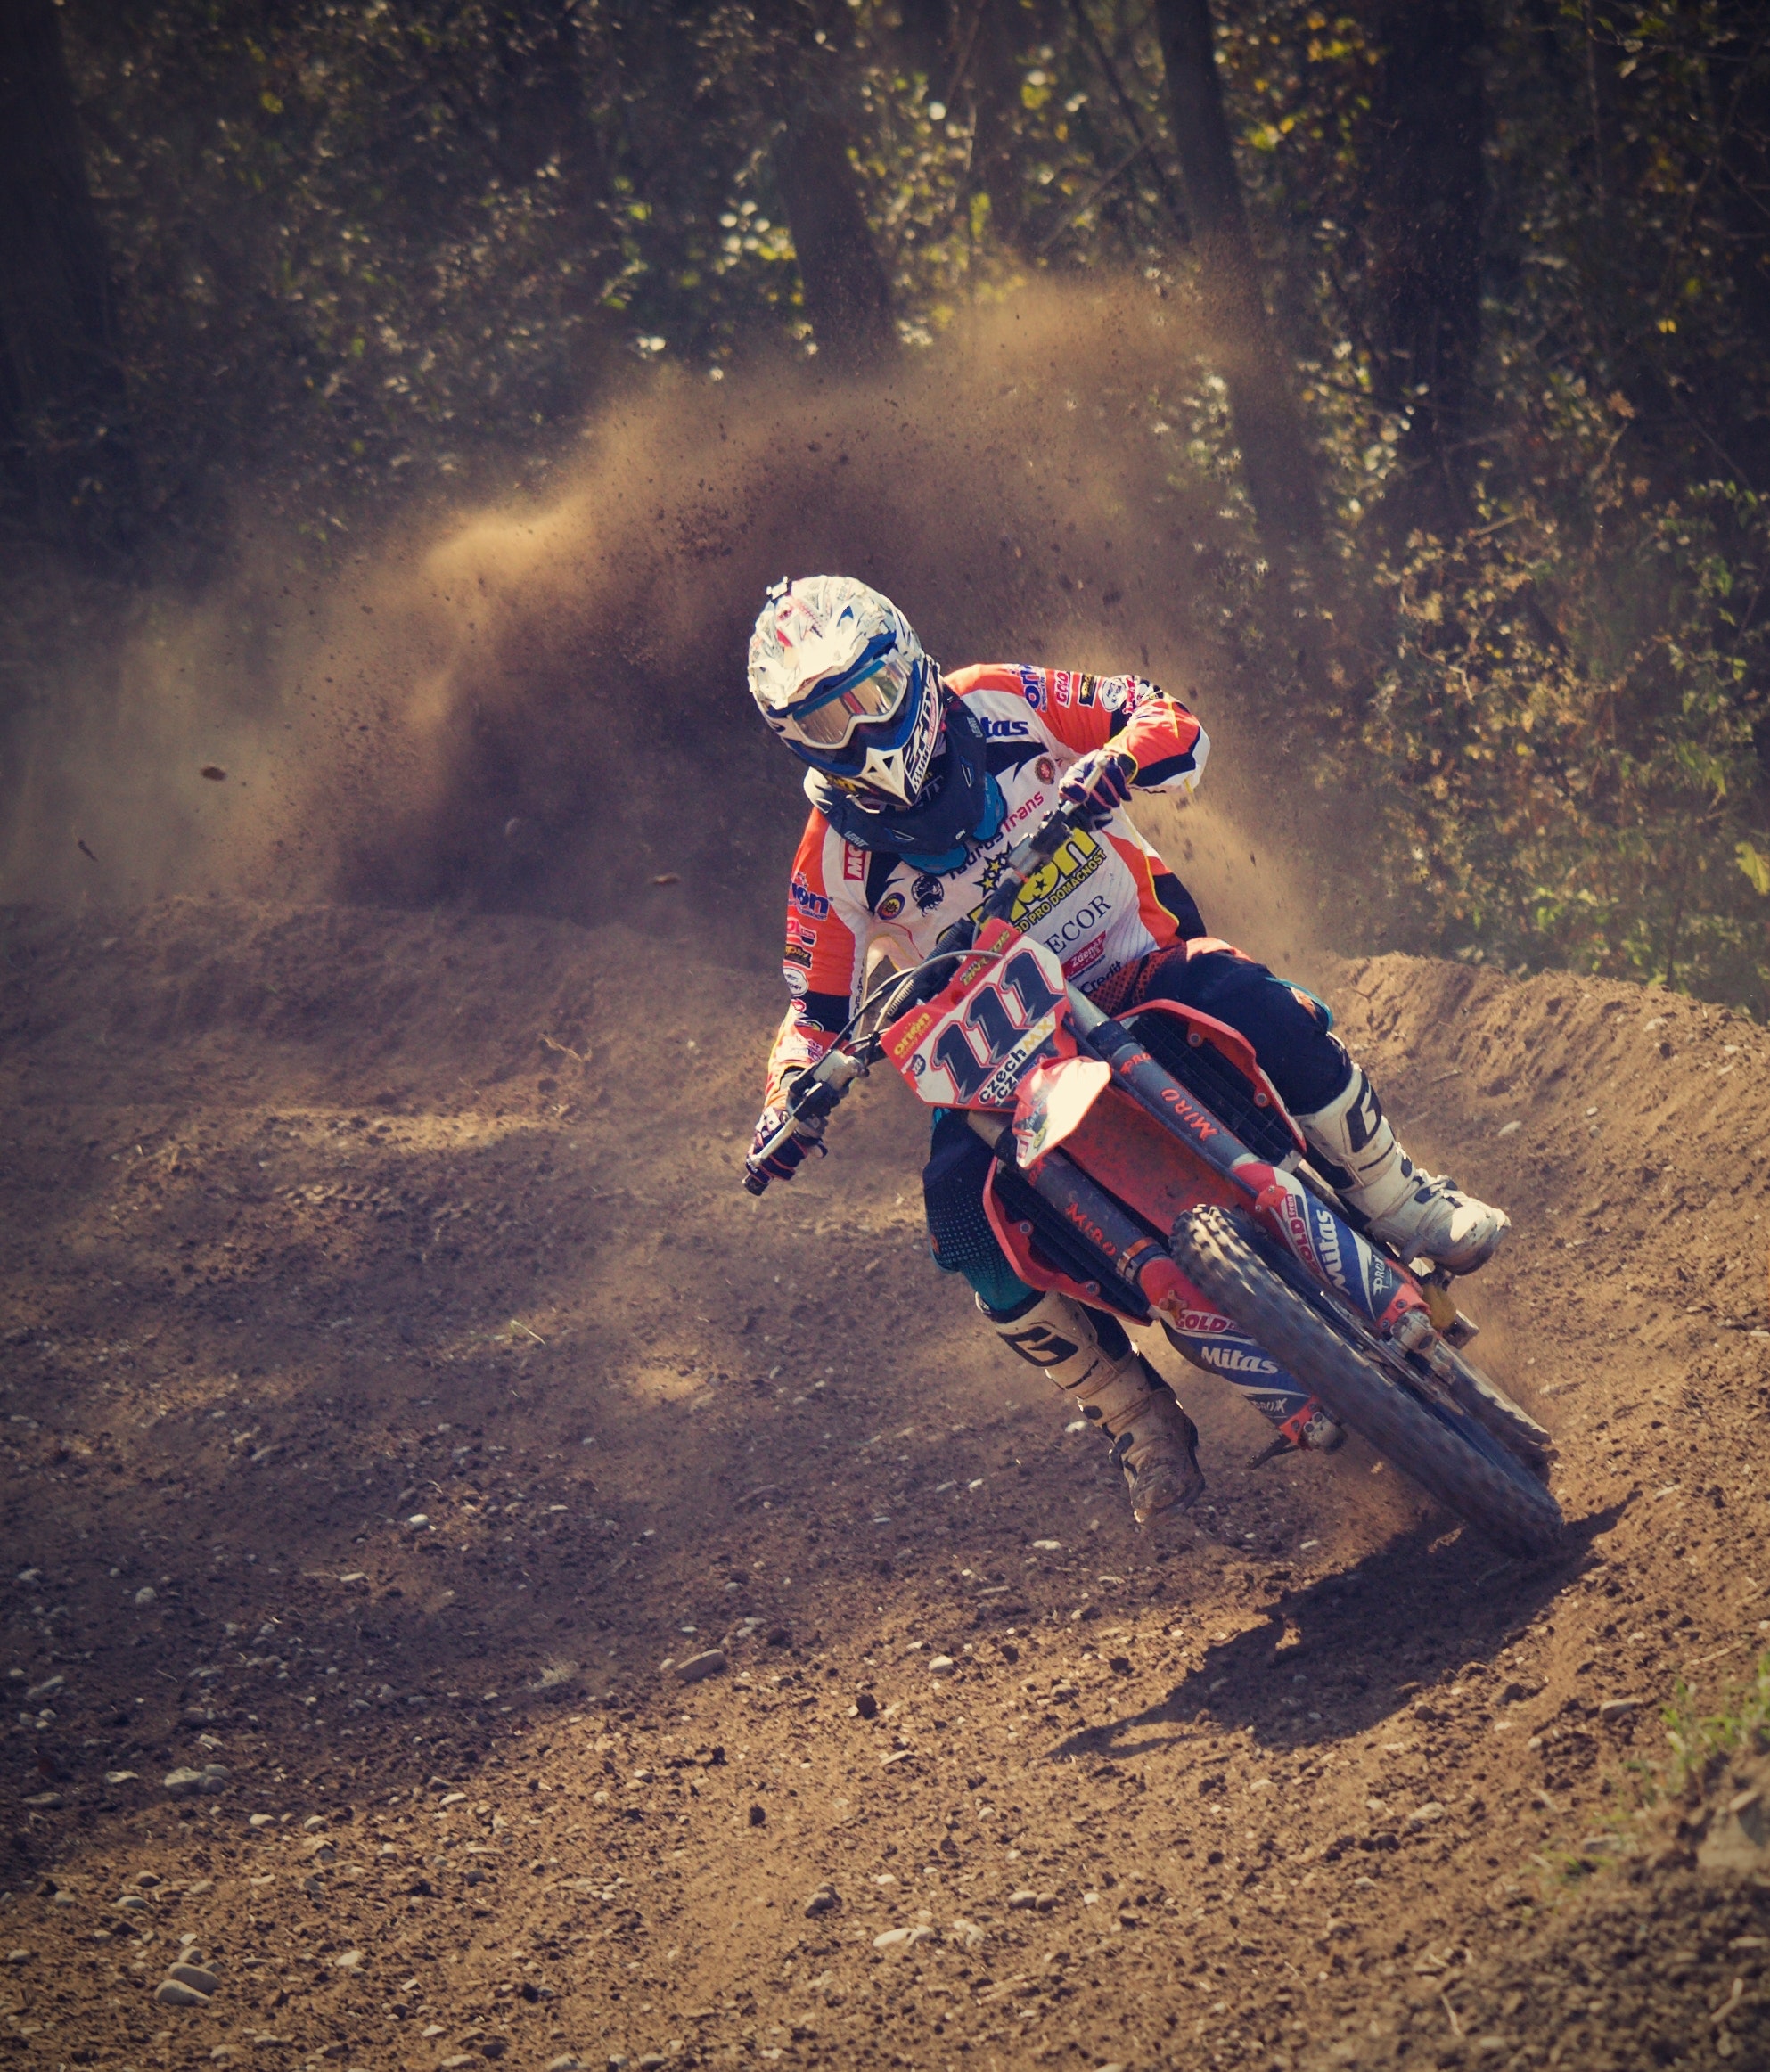 Man in White and Orange Motocross Overall Riding His Motocross Dirt Bike during Daytime, Action, Motorbike, Vehicle, Trees, HQ Photo